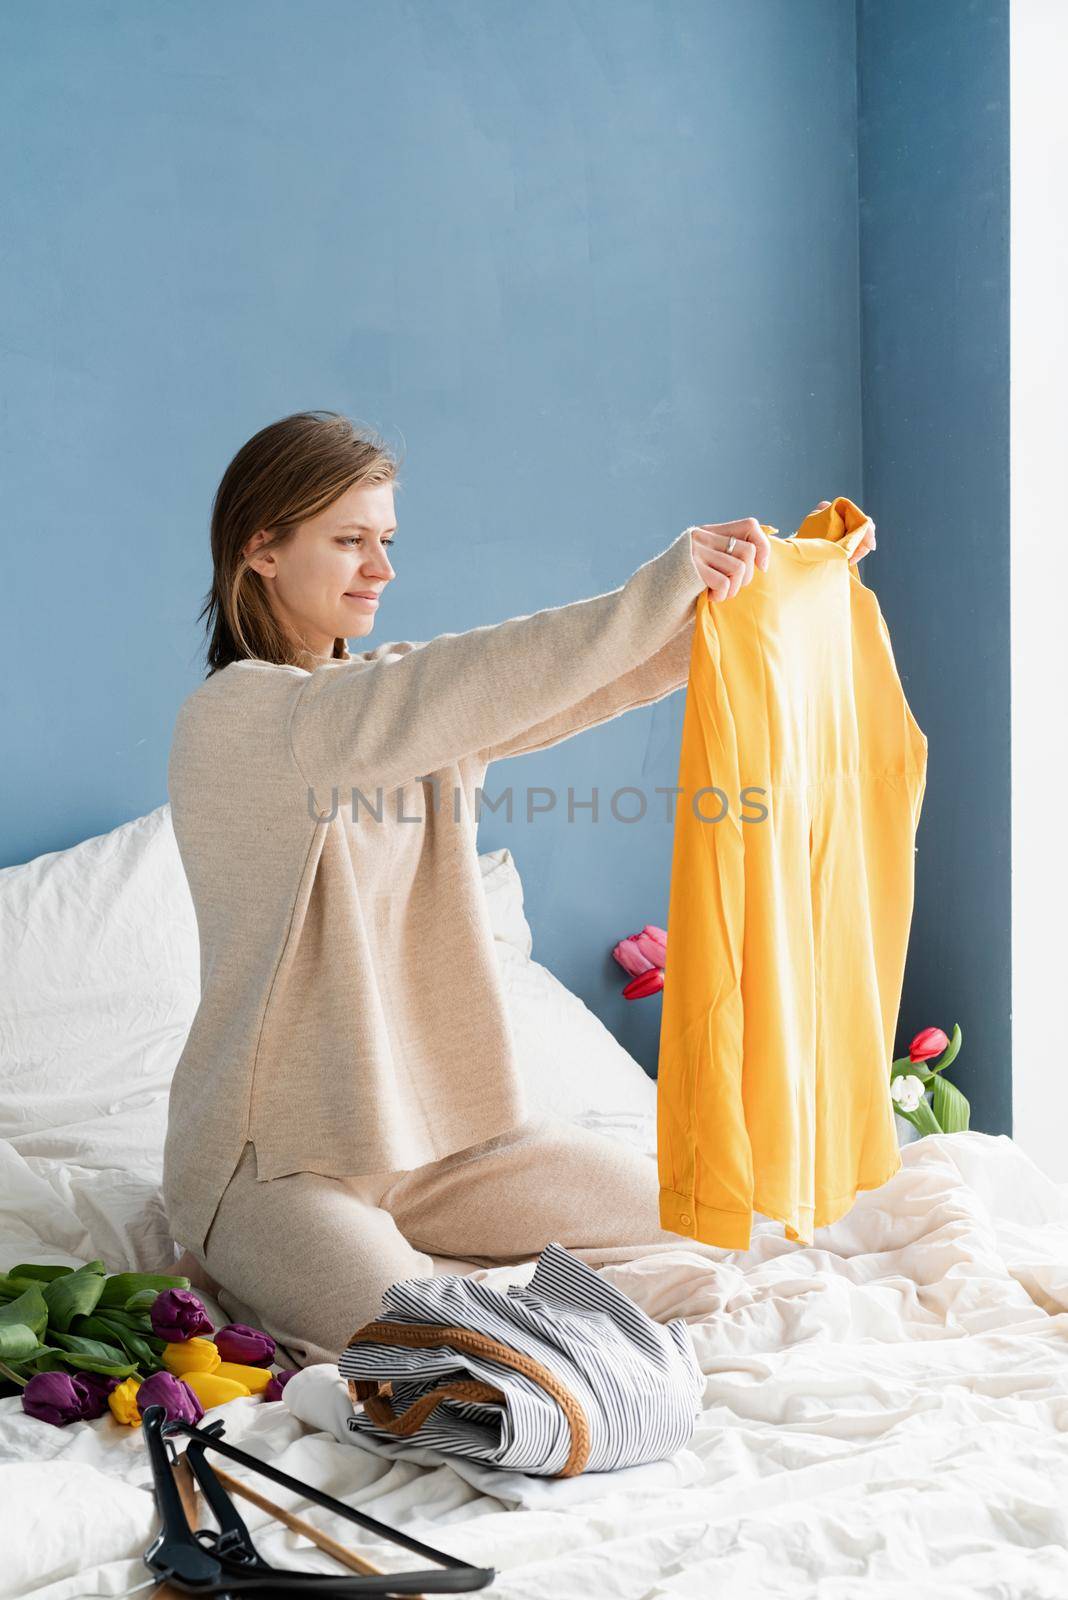 Young smiling woman organizing clothes sitting on the bed at home